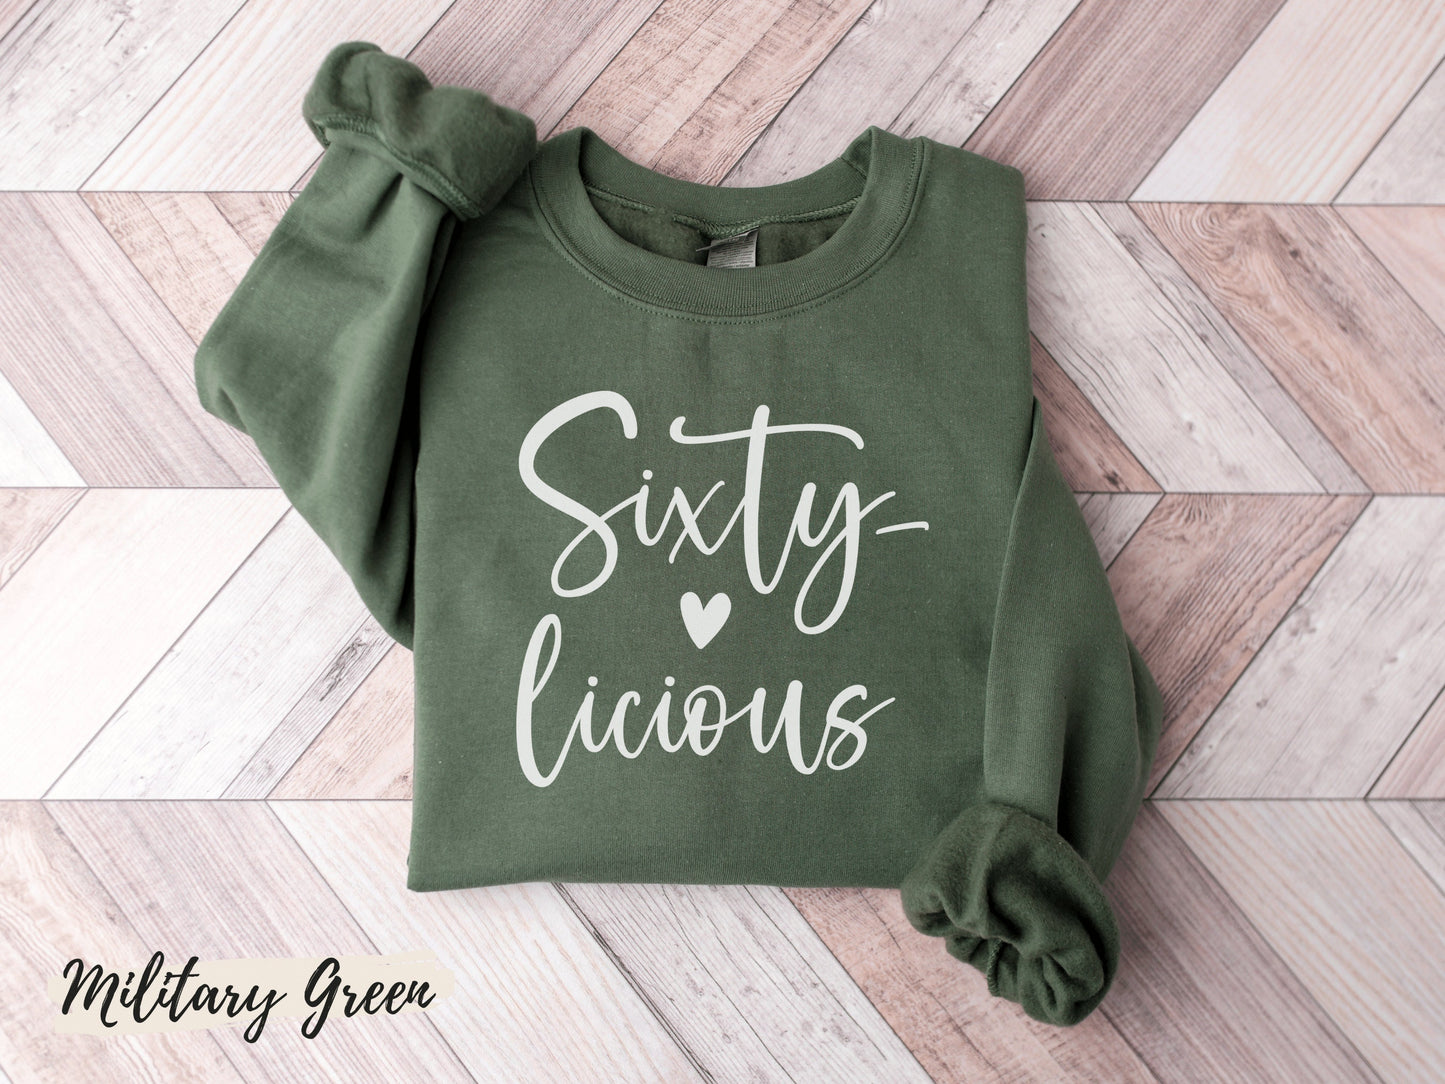 Sixty licious Sweatshirt, 60th Birthday Gifts for Women, 60th Birthday Shirt, 60th Birthday Gifts, 60th Birthday Women, 60th Birthday Friend